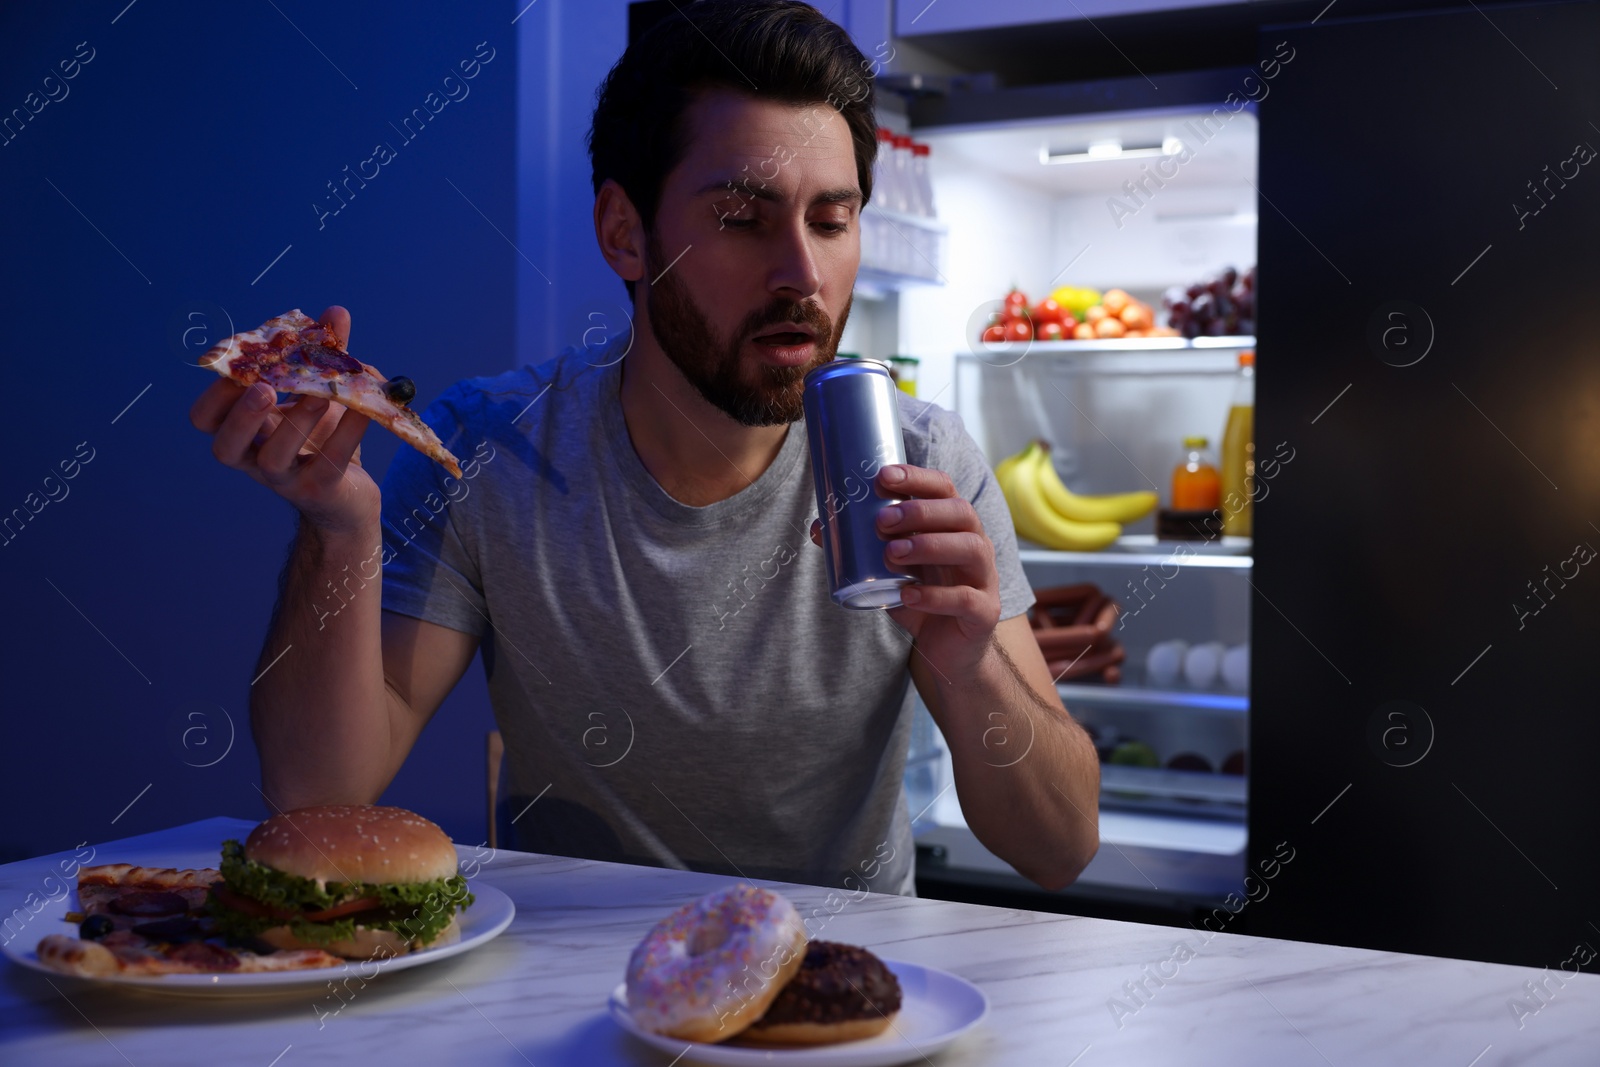 Photo of Man drinking soda and eating junk food in kitchen at night. Bad habit